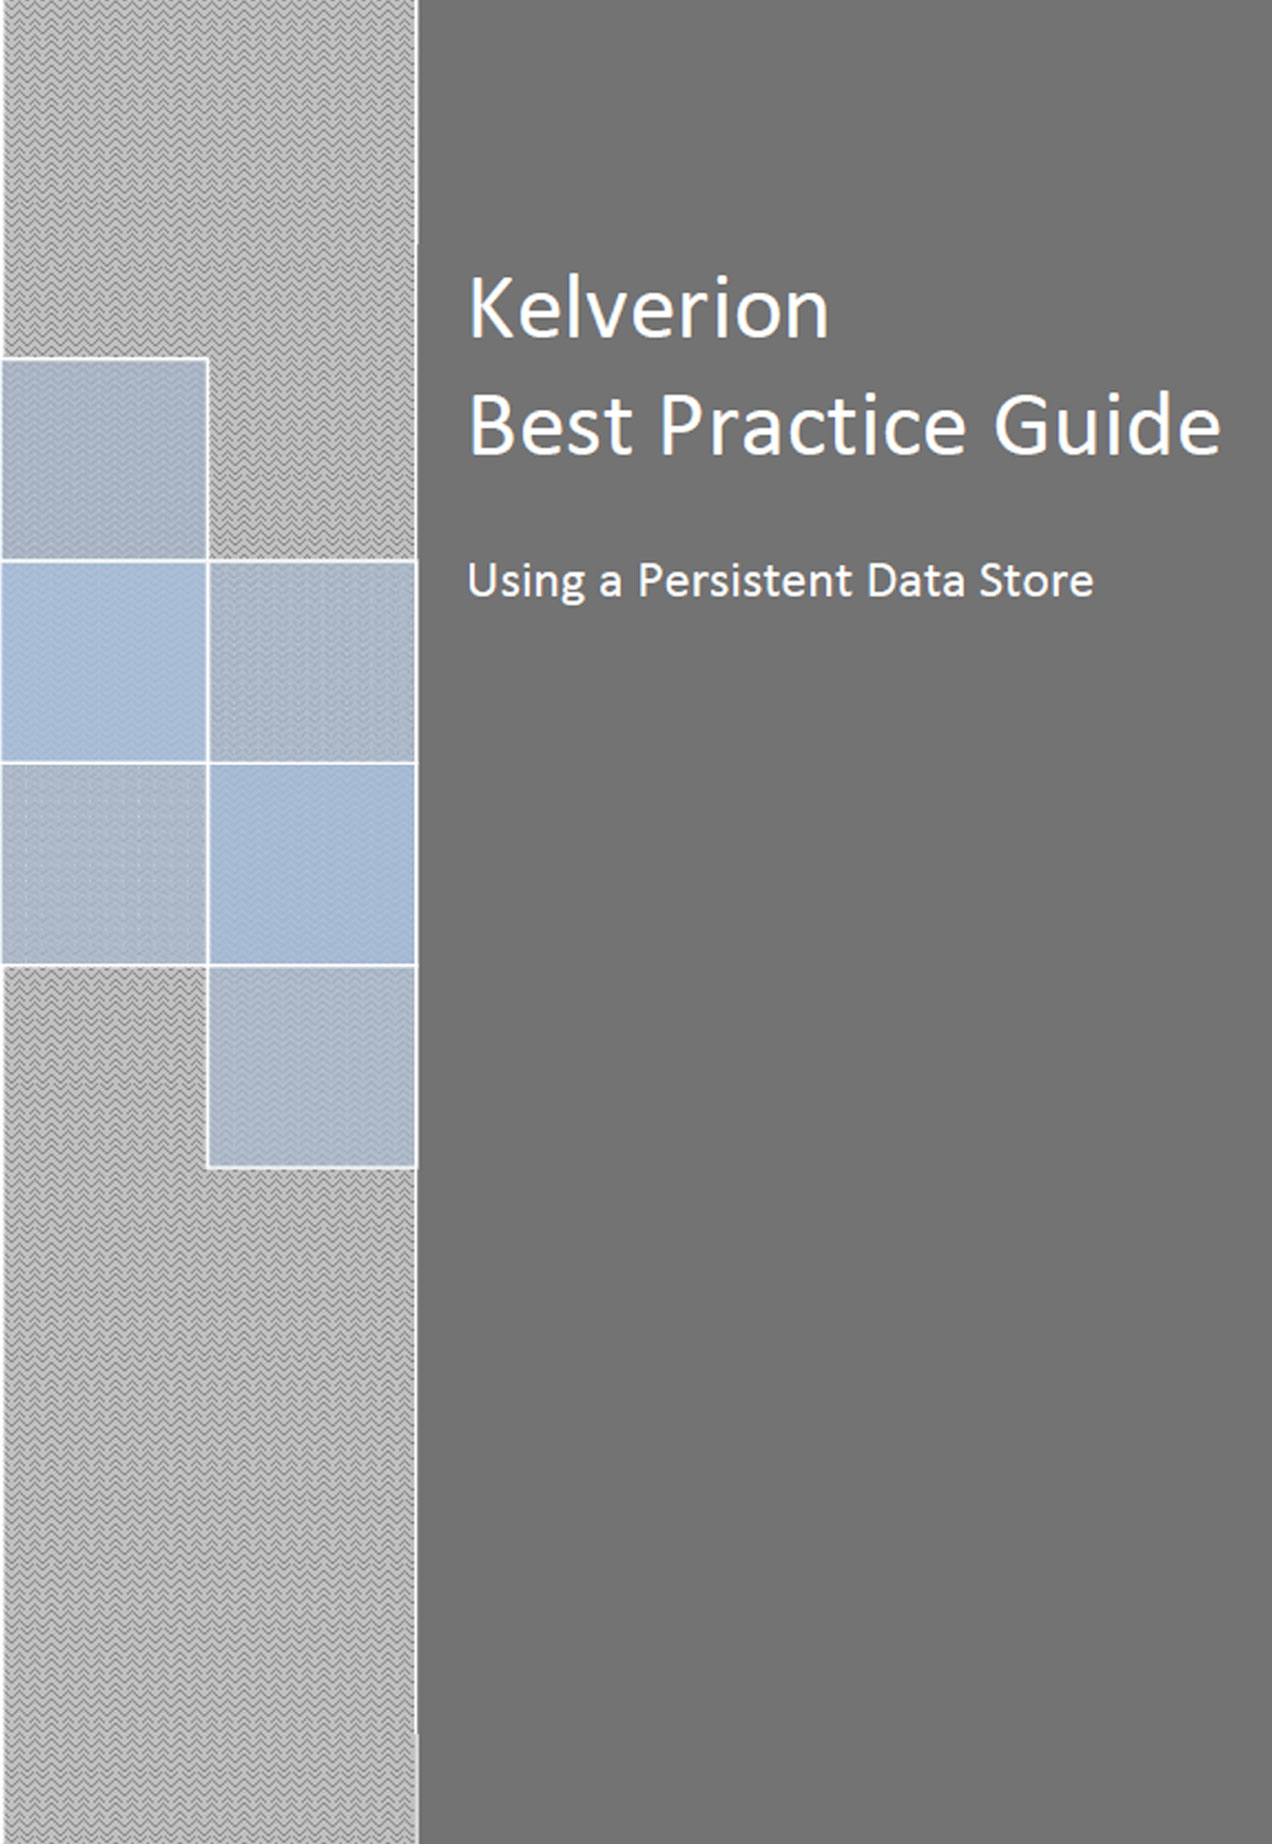 Using a persistent data store guide front cover